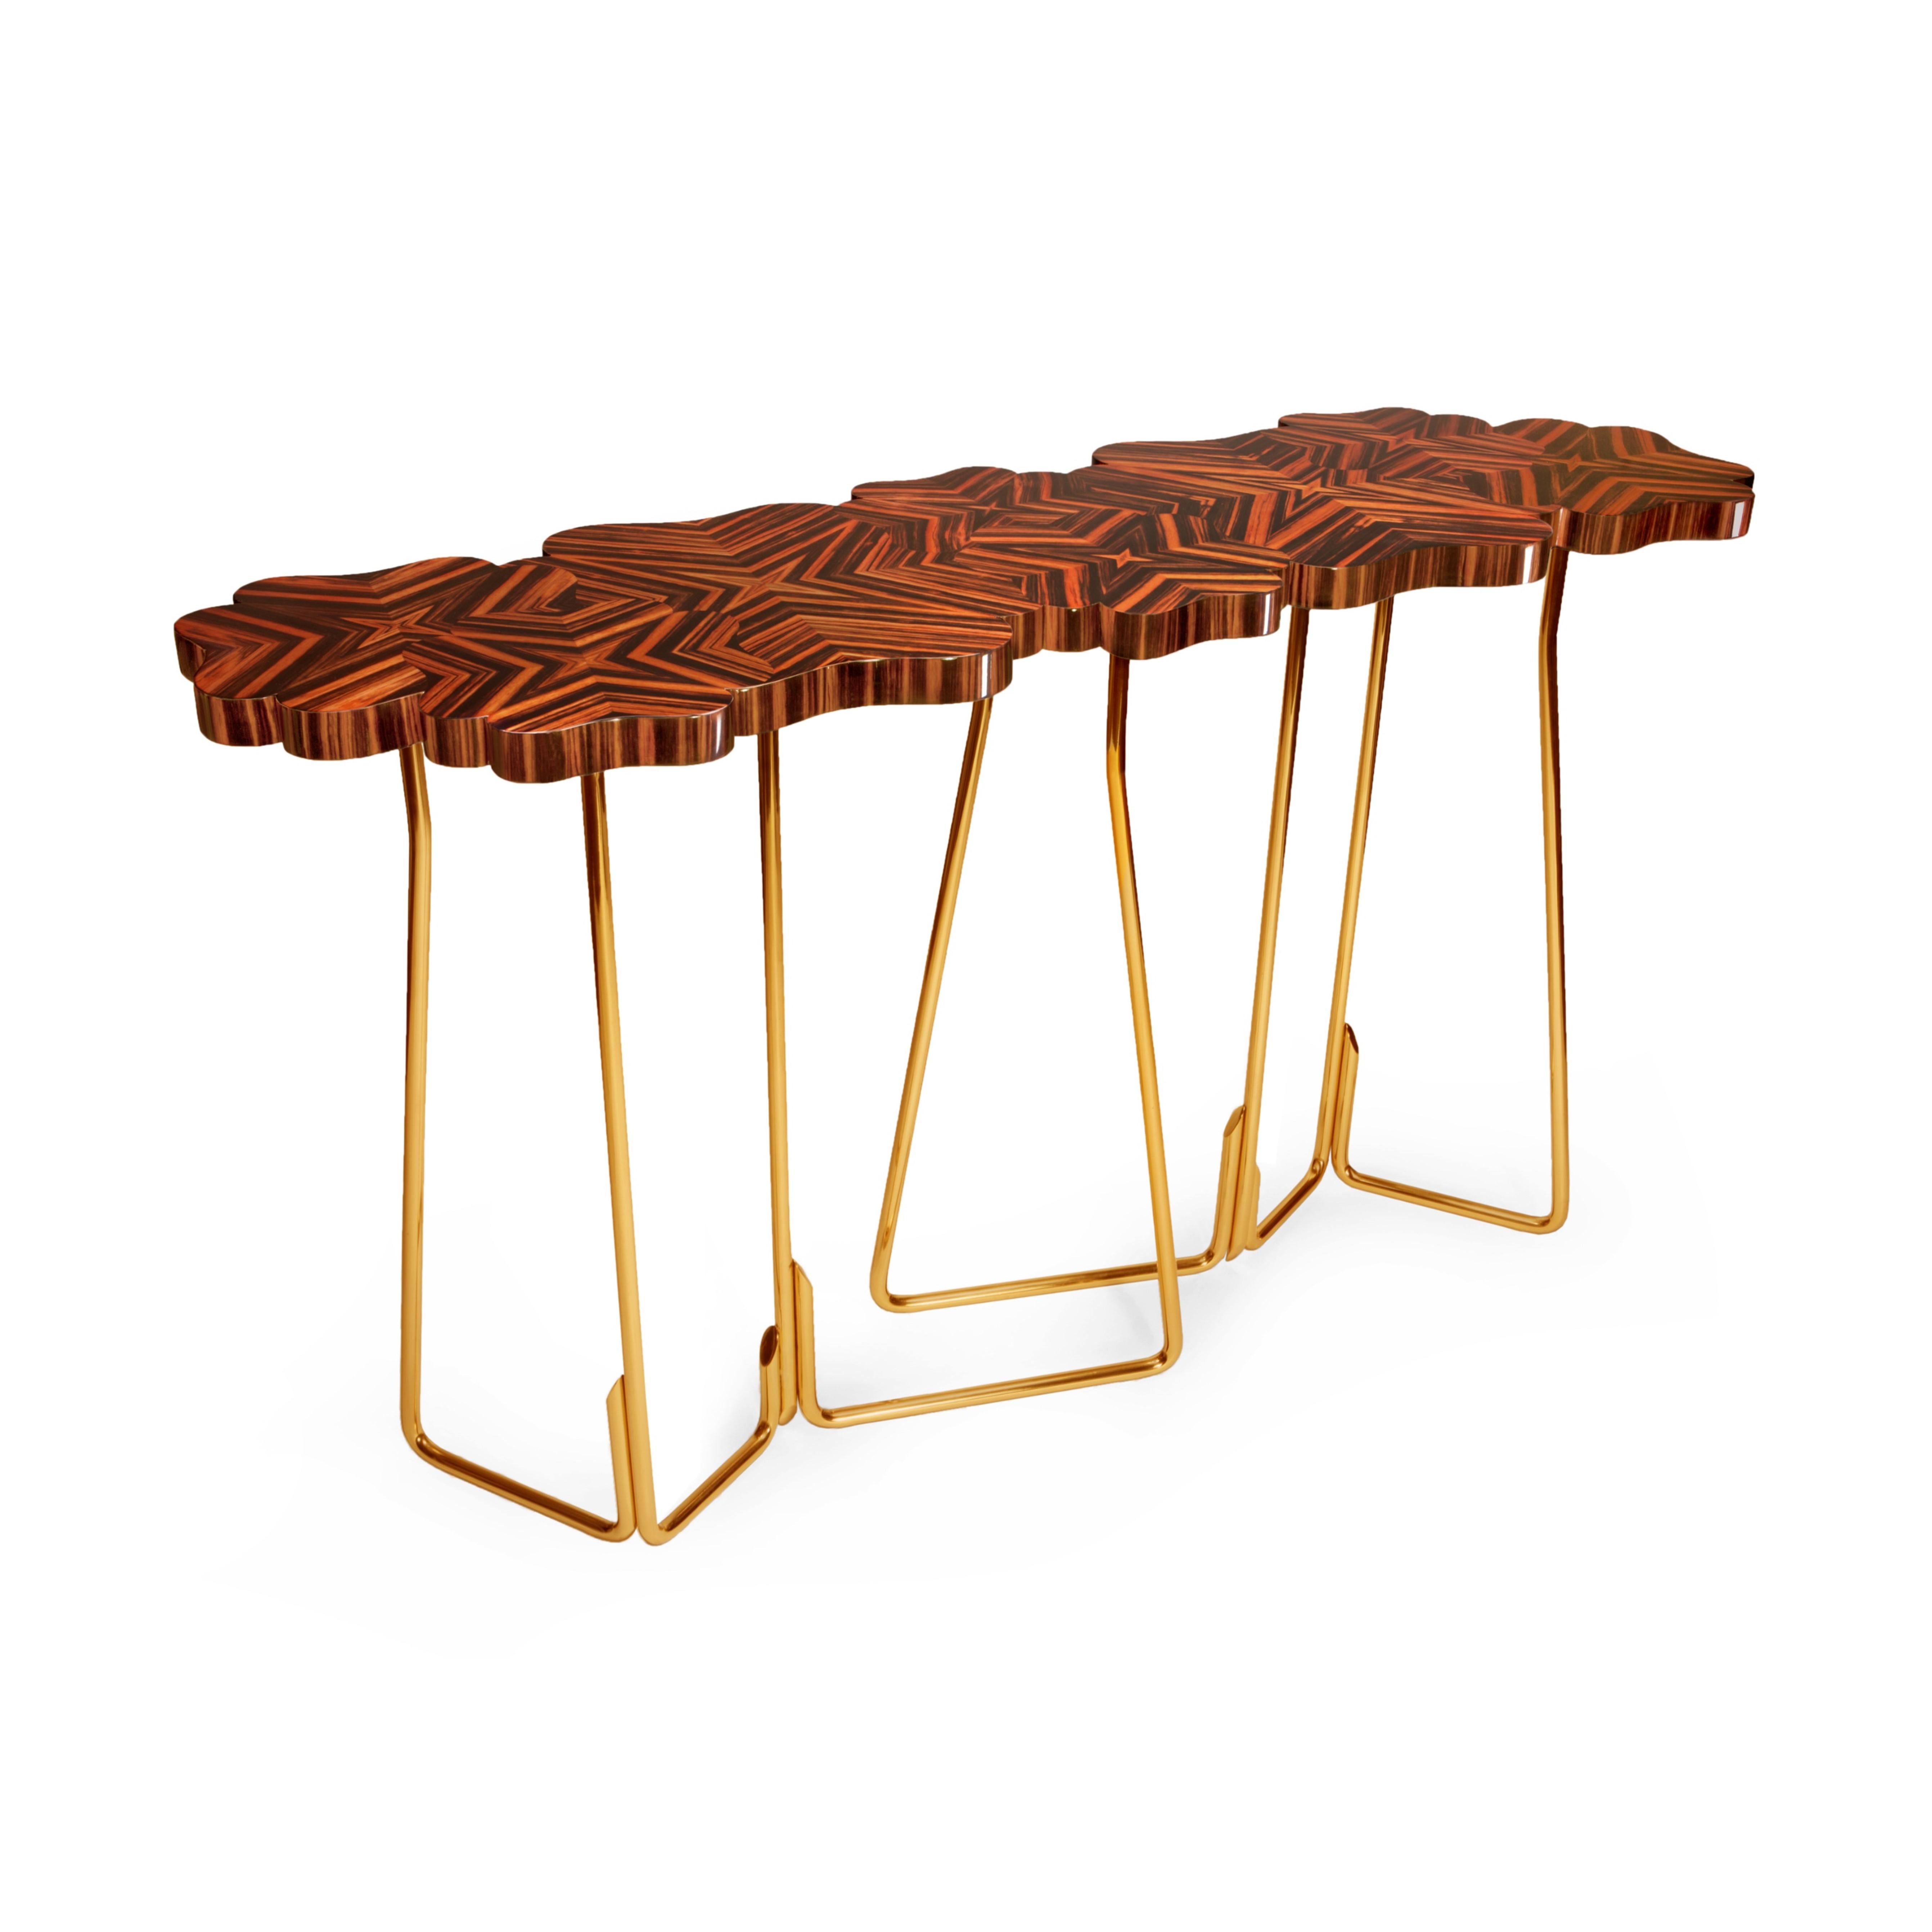 Continuing the interpretation of the Legend of the four-leaf clover materialized in the Four… for Luck coffee table, this console with the same name explores the meaning of Luck in these peculiar plants.
On the top made with exquisite marquetry